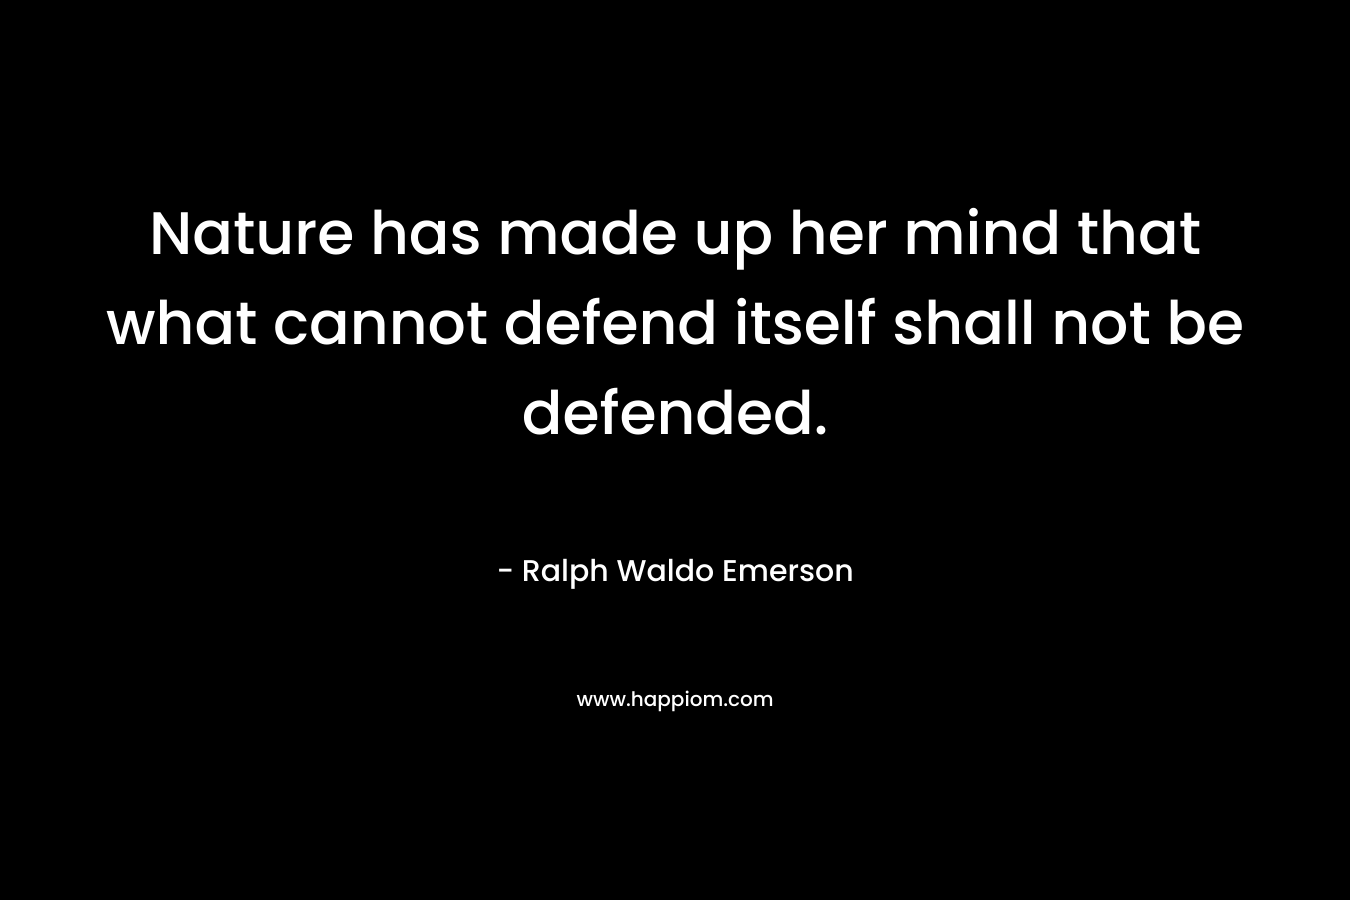 Nature has made up her mind that what cannot defend itself shall not be defended. – Ralph Waldo Emerson